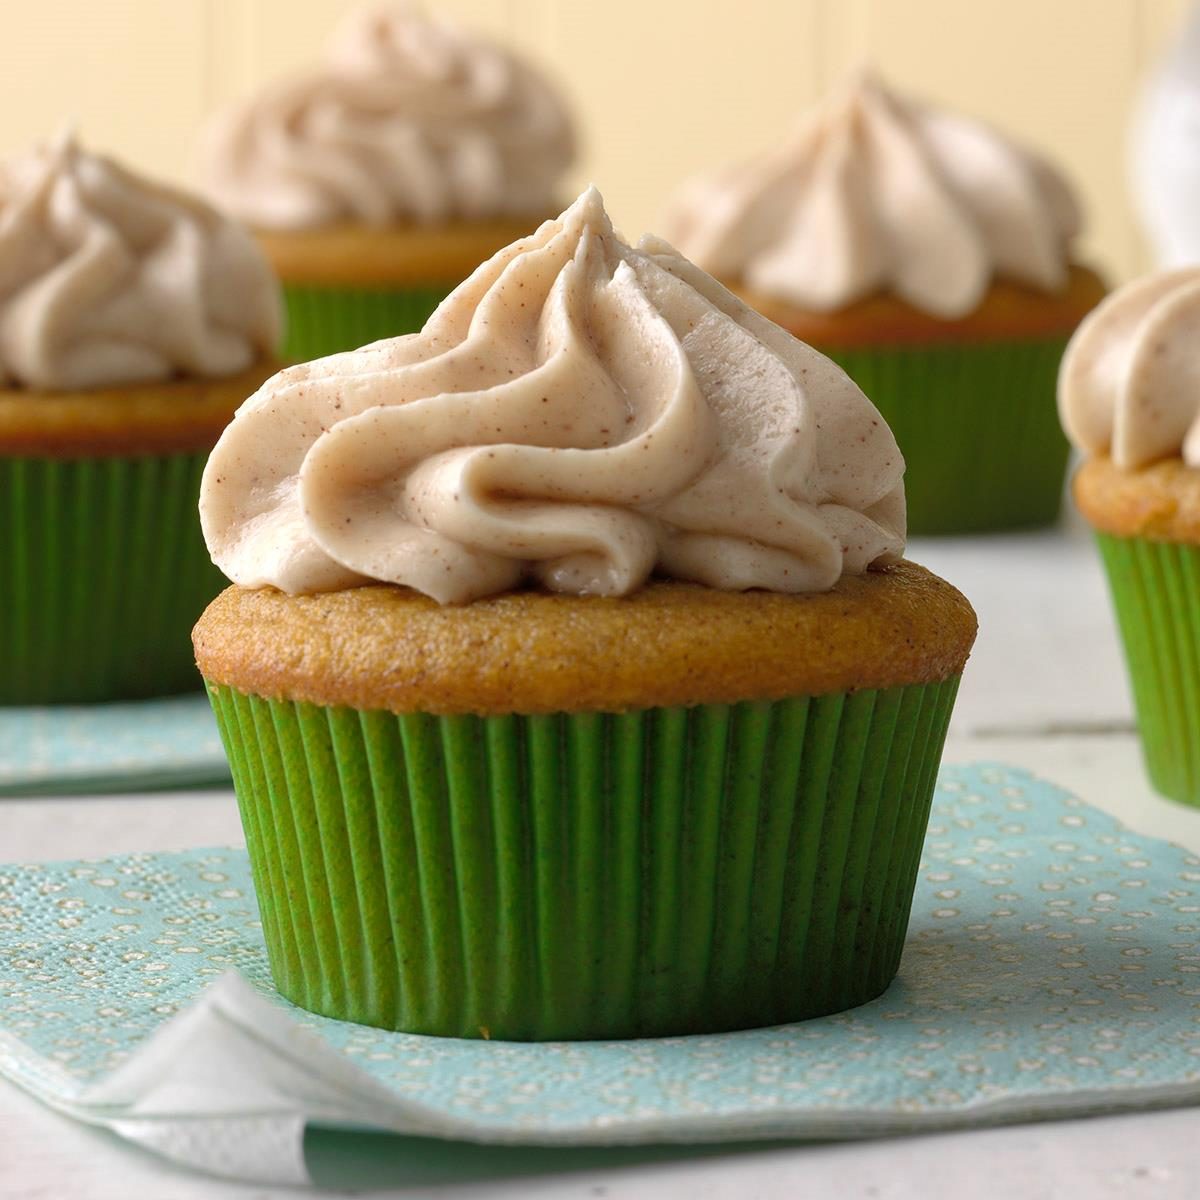 Pumpkin Spice Cupcakes With Cream Cheese Icing